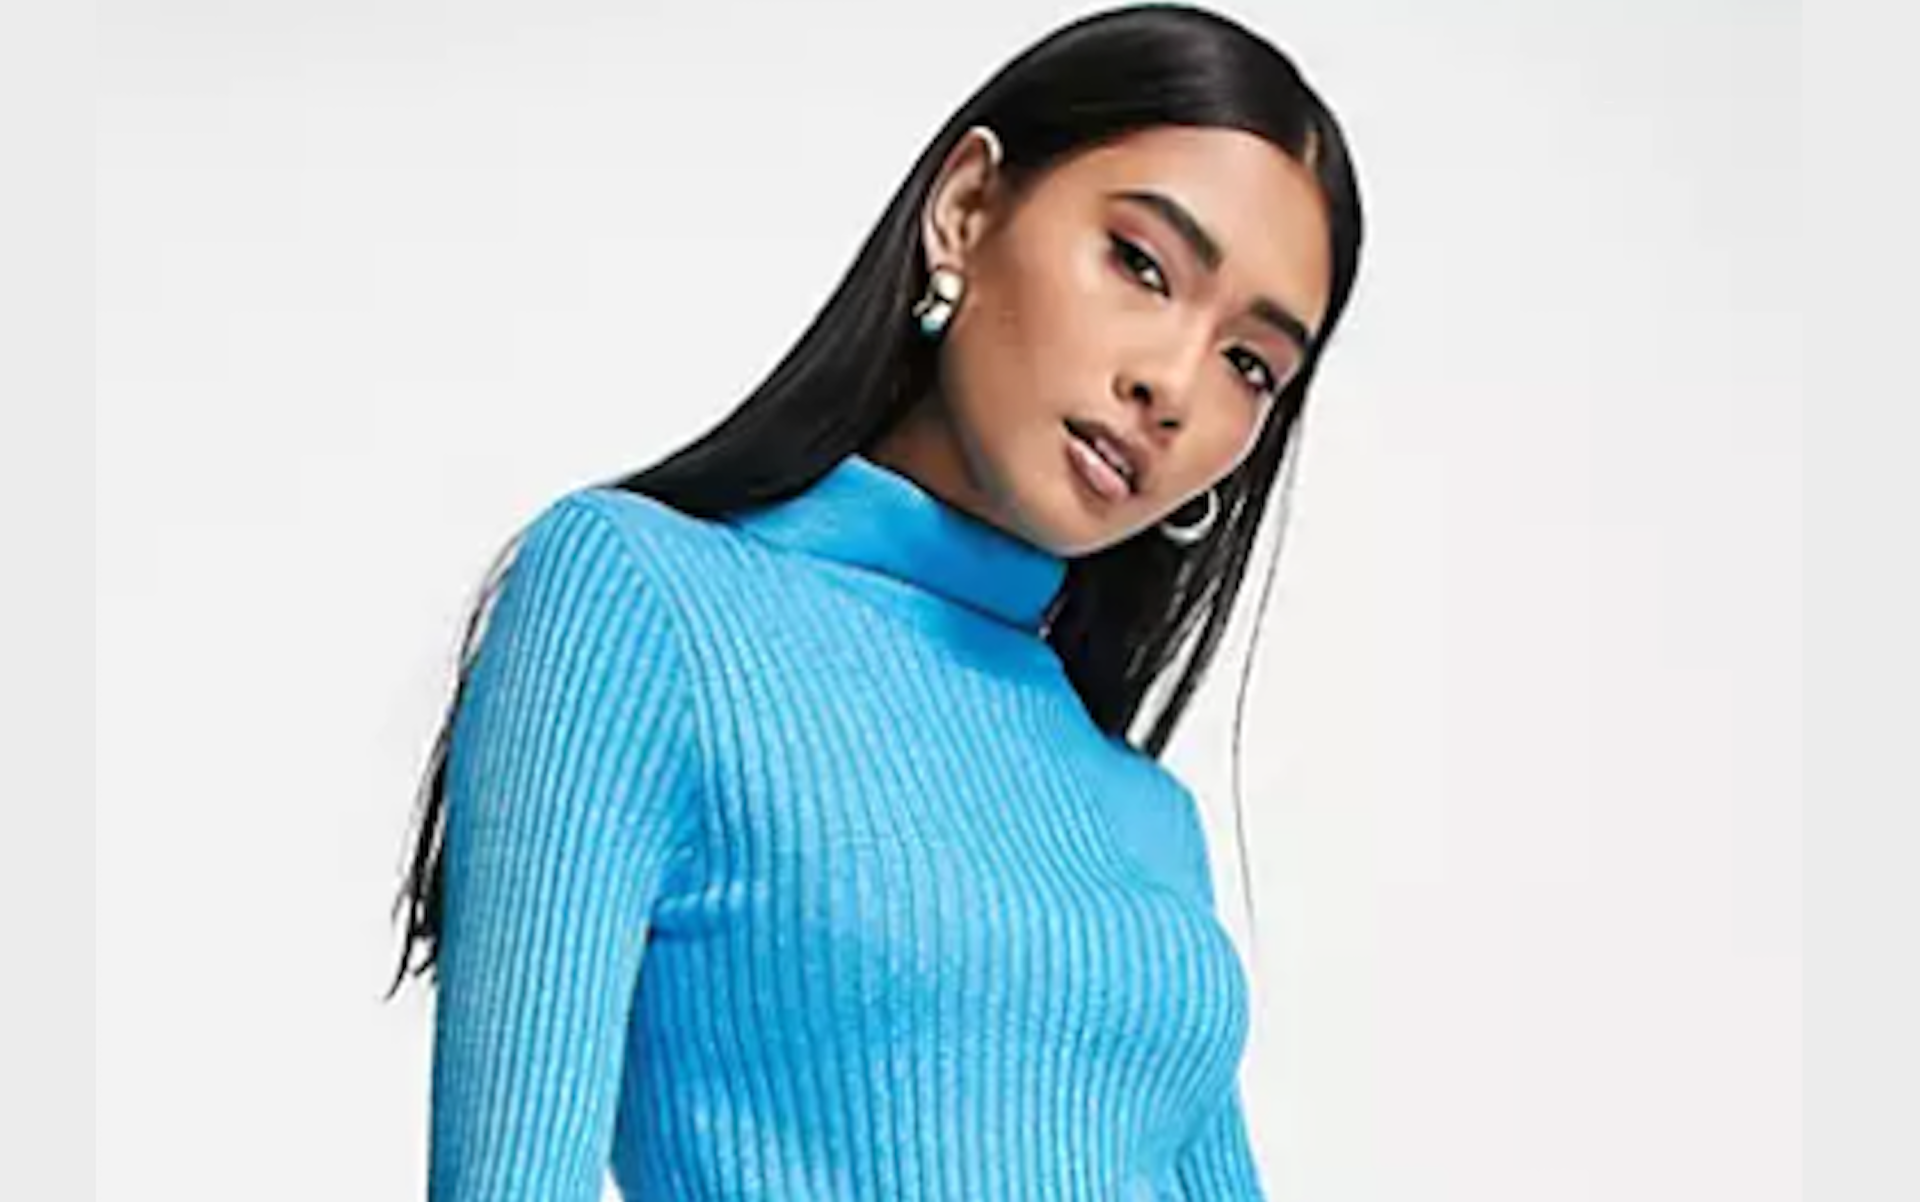 Asos is giving you another reason to be thankful this season, with their 50% off sale that is going on right now. Find some new jackets, sweaters, scarves, and everything else you need to stay warm this season.